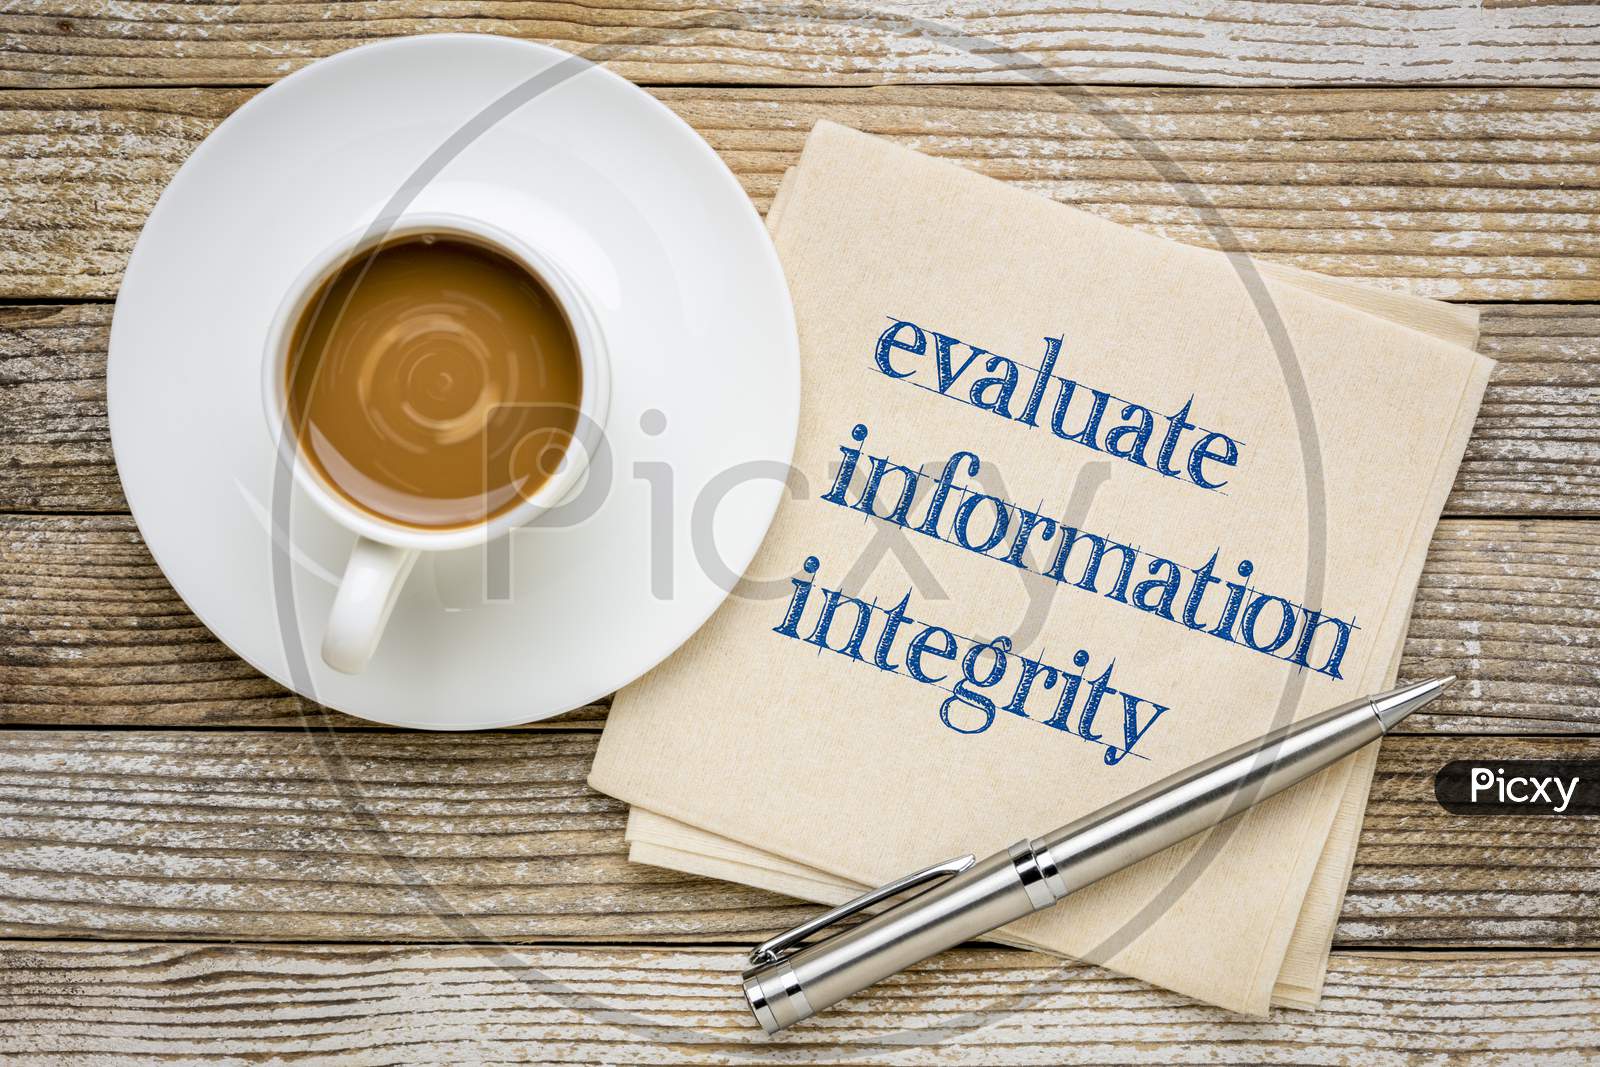 Evaluate Information Integrity Reminder - Handwriting On A Napkin With A Cup Of Coffee, Information Overload, Fake News And Infodemic Concept